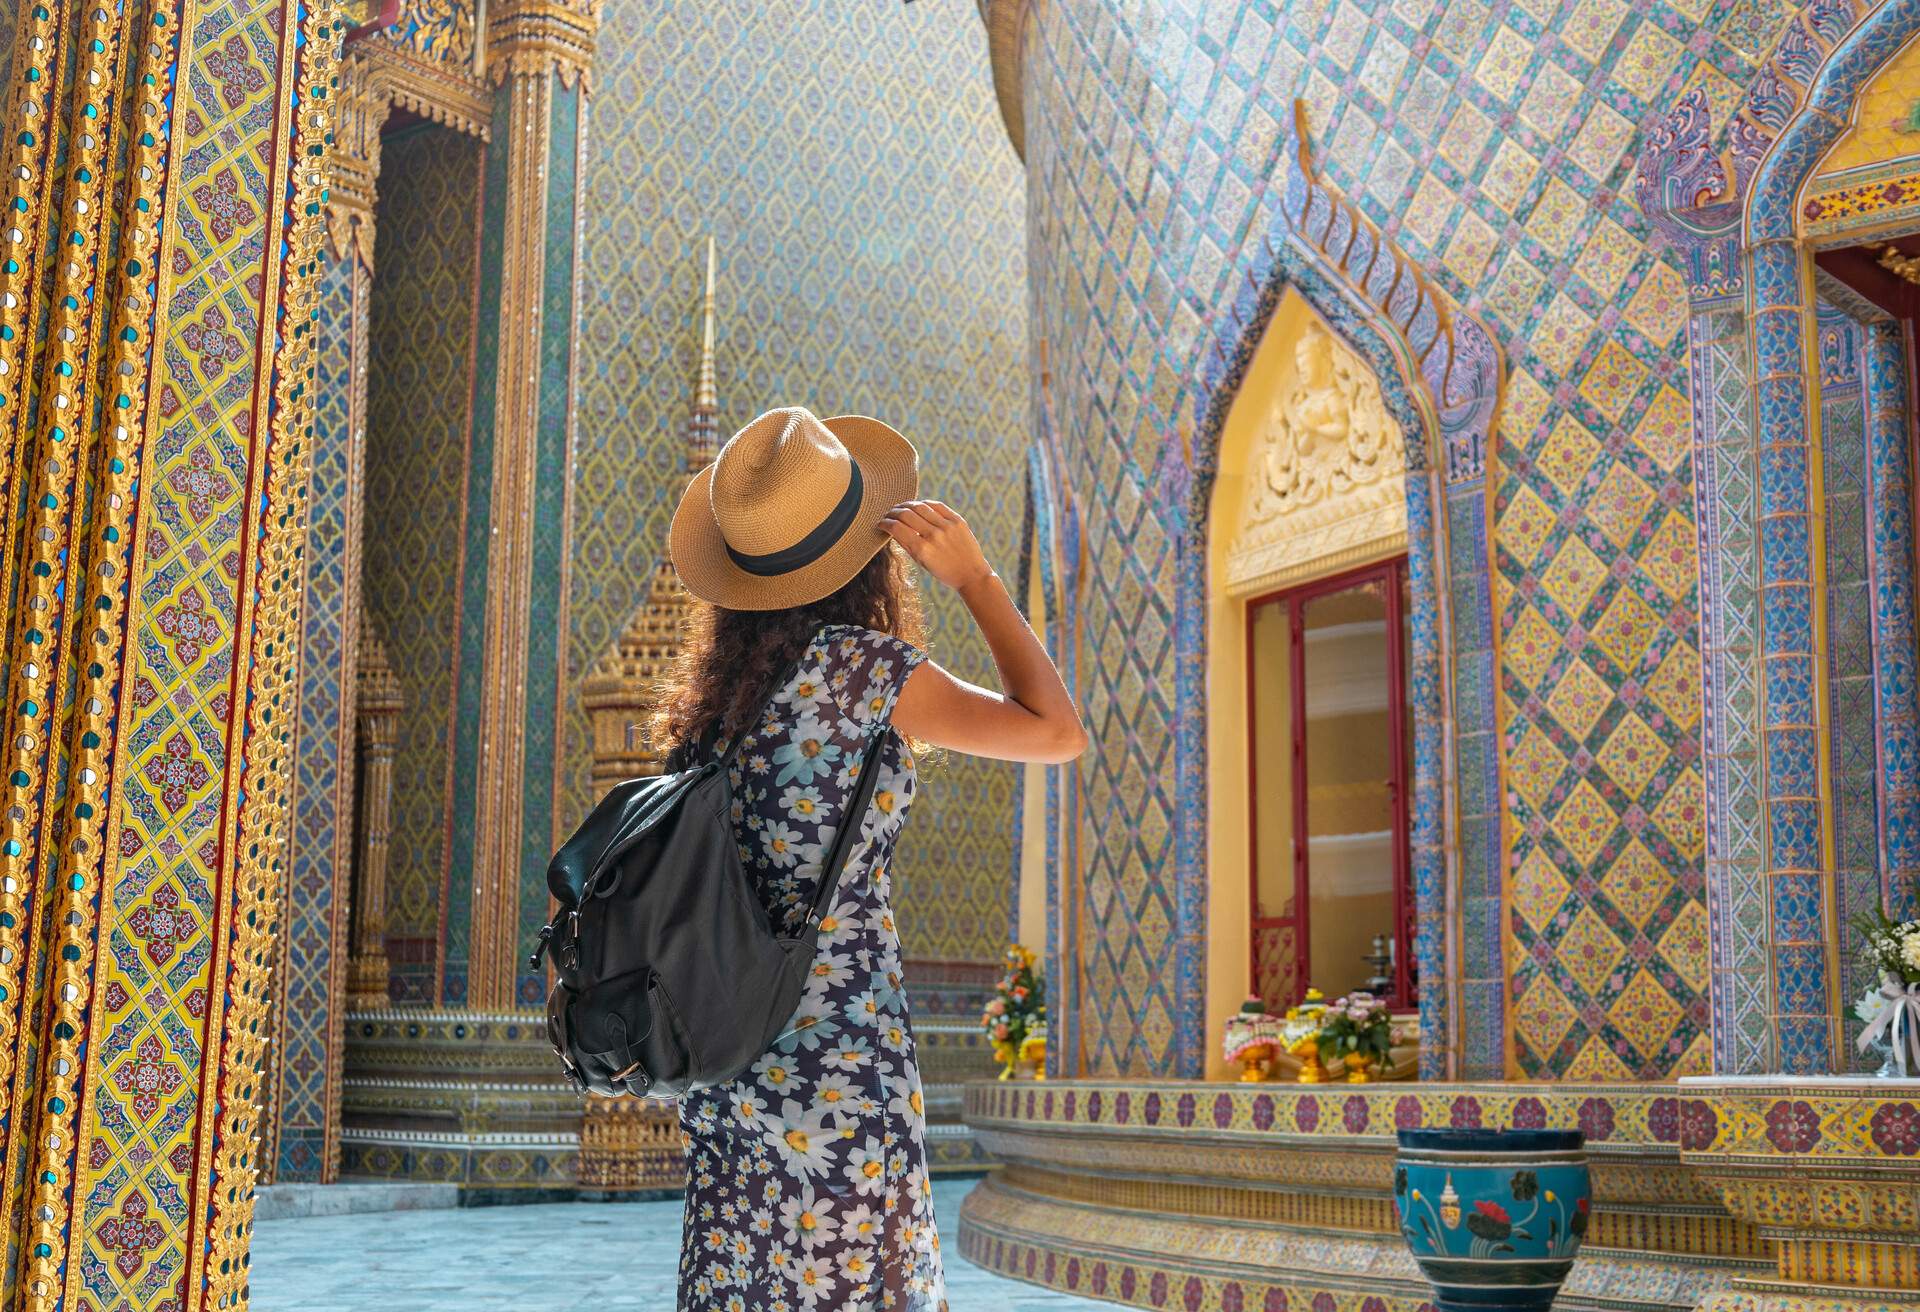 Woman in a floral dress touches her hat and looks up at the intricately crafted ceramic and golden walls of a temple.